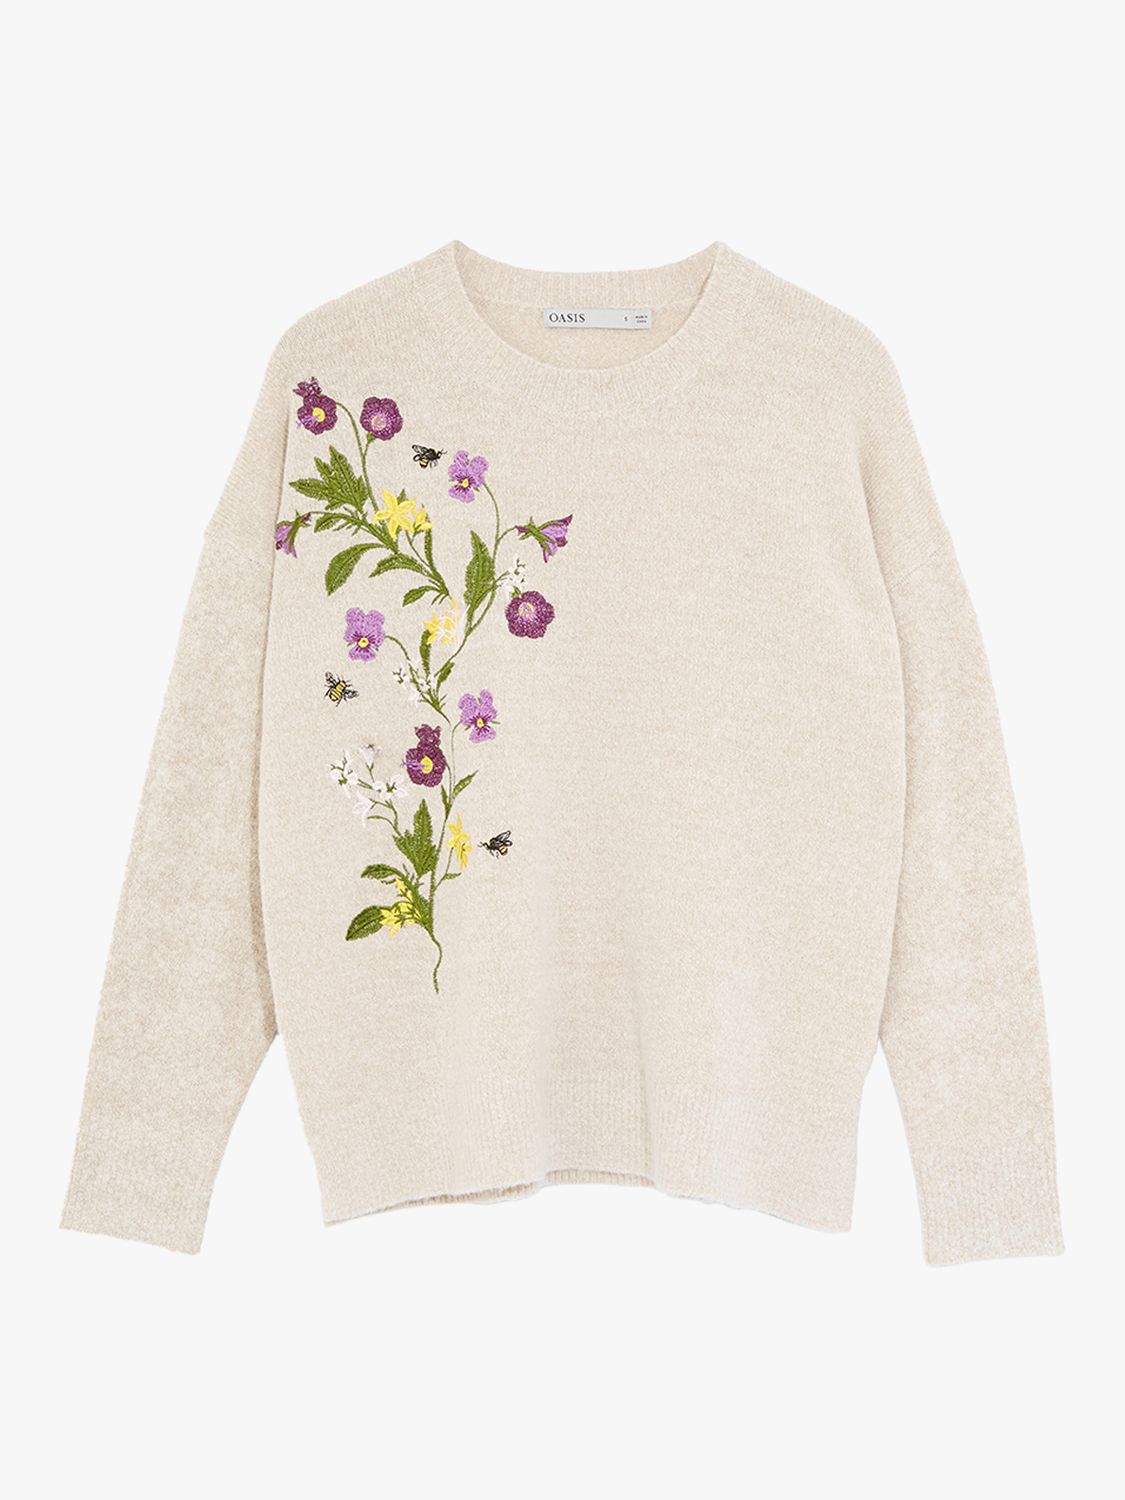 Oasis Floral Embroidered Jumper, Mid Neutral at John Lewis & Partners